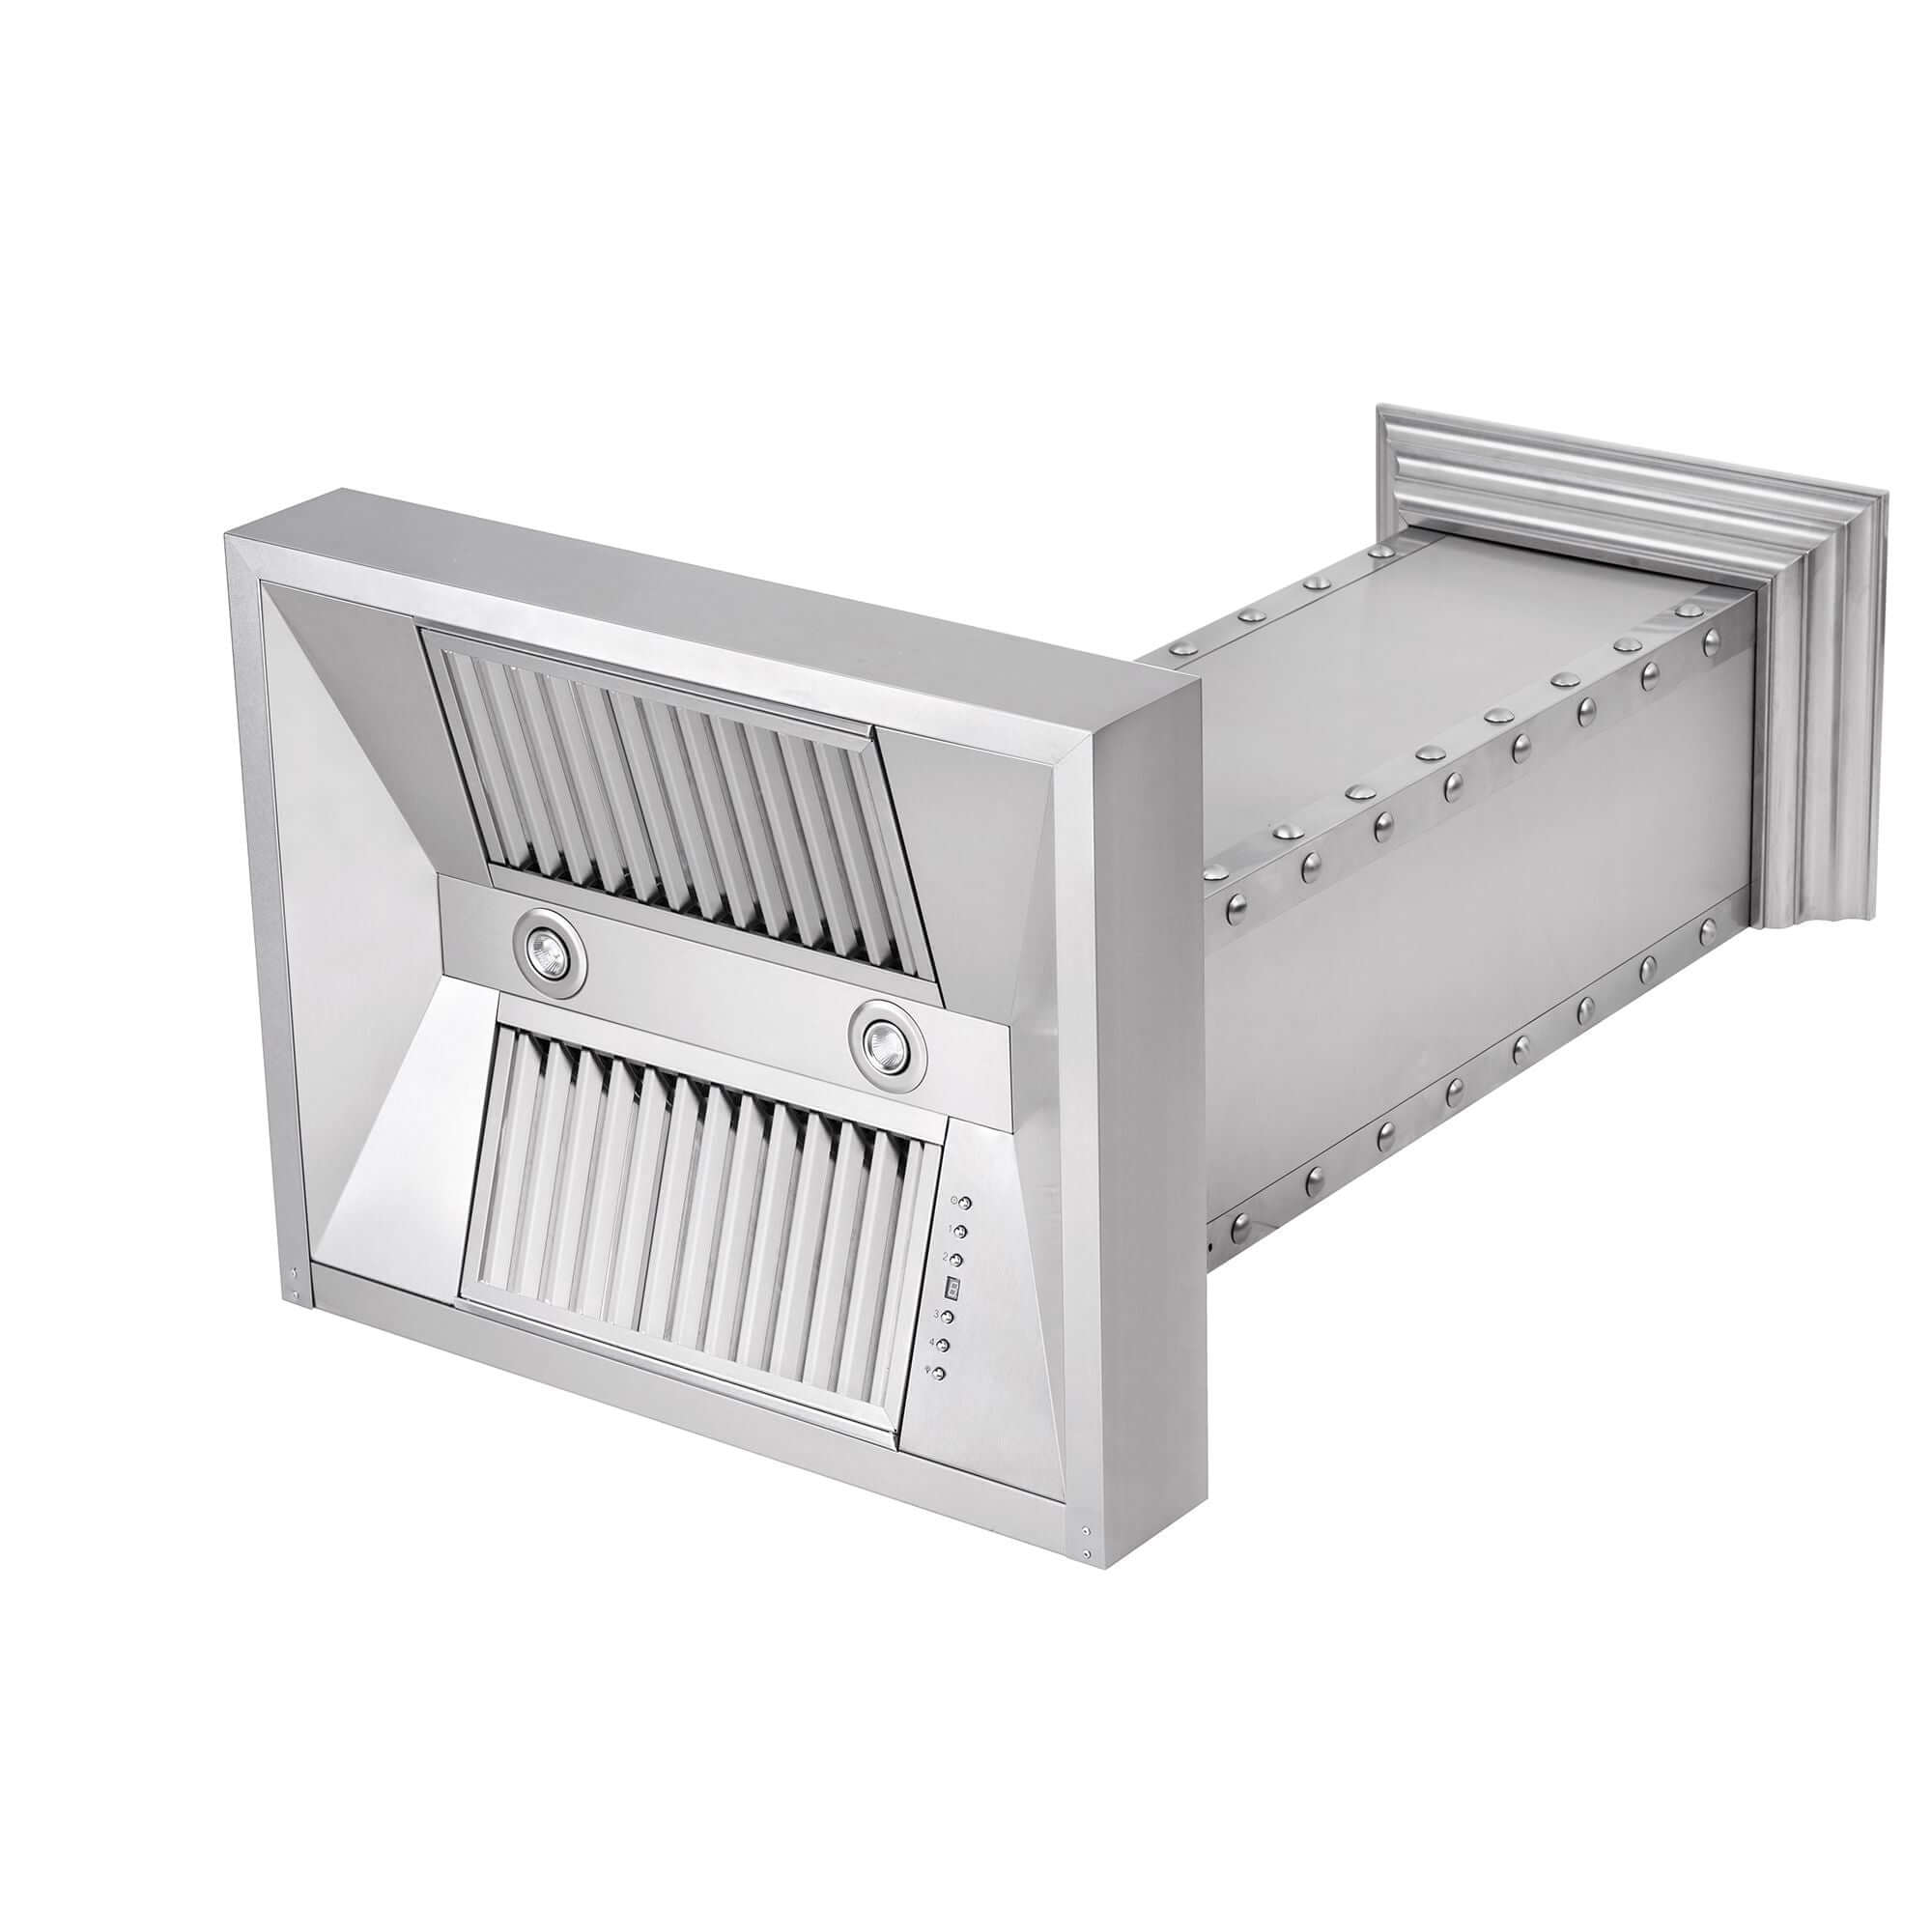 ZLINE Designer Series Wall Mount Range Hood in DuraSnow Stainless Steel with Nailhead Rivets (655-4SSSS) side under view of LED lighting and baffle filters.